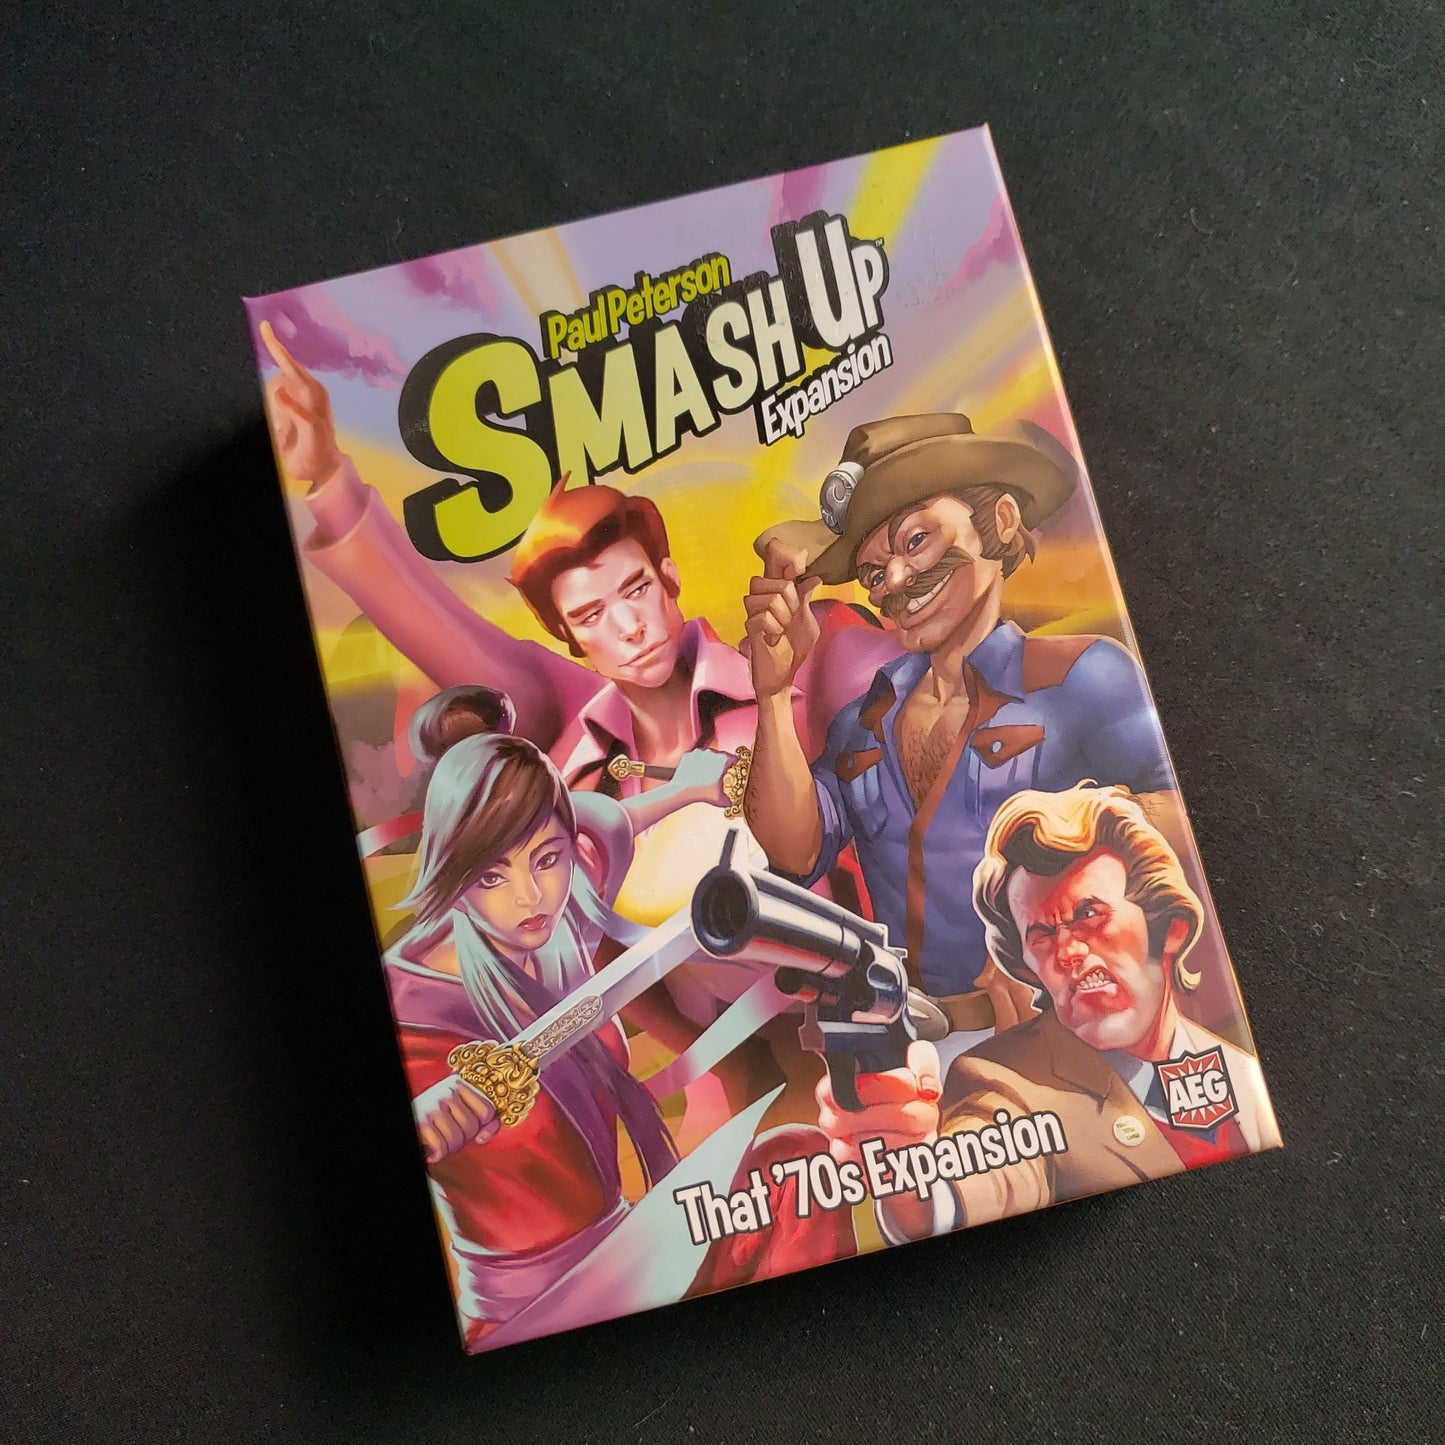 Image shows the front of the box for the That '70s Expansion for the Smash Up card game